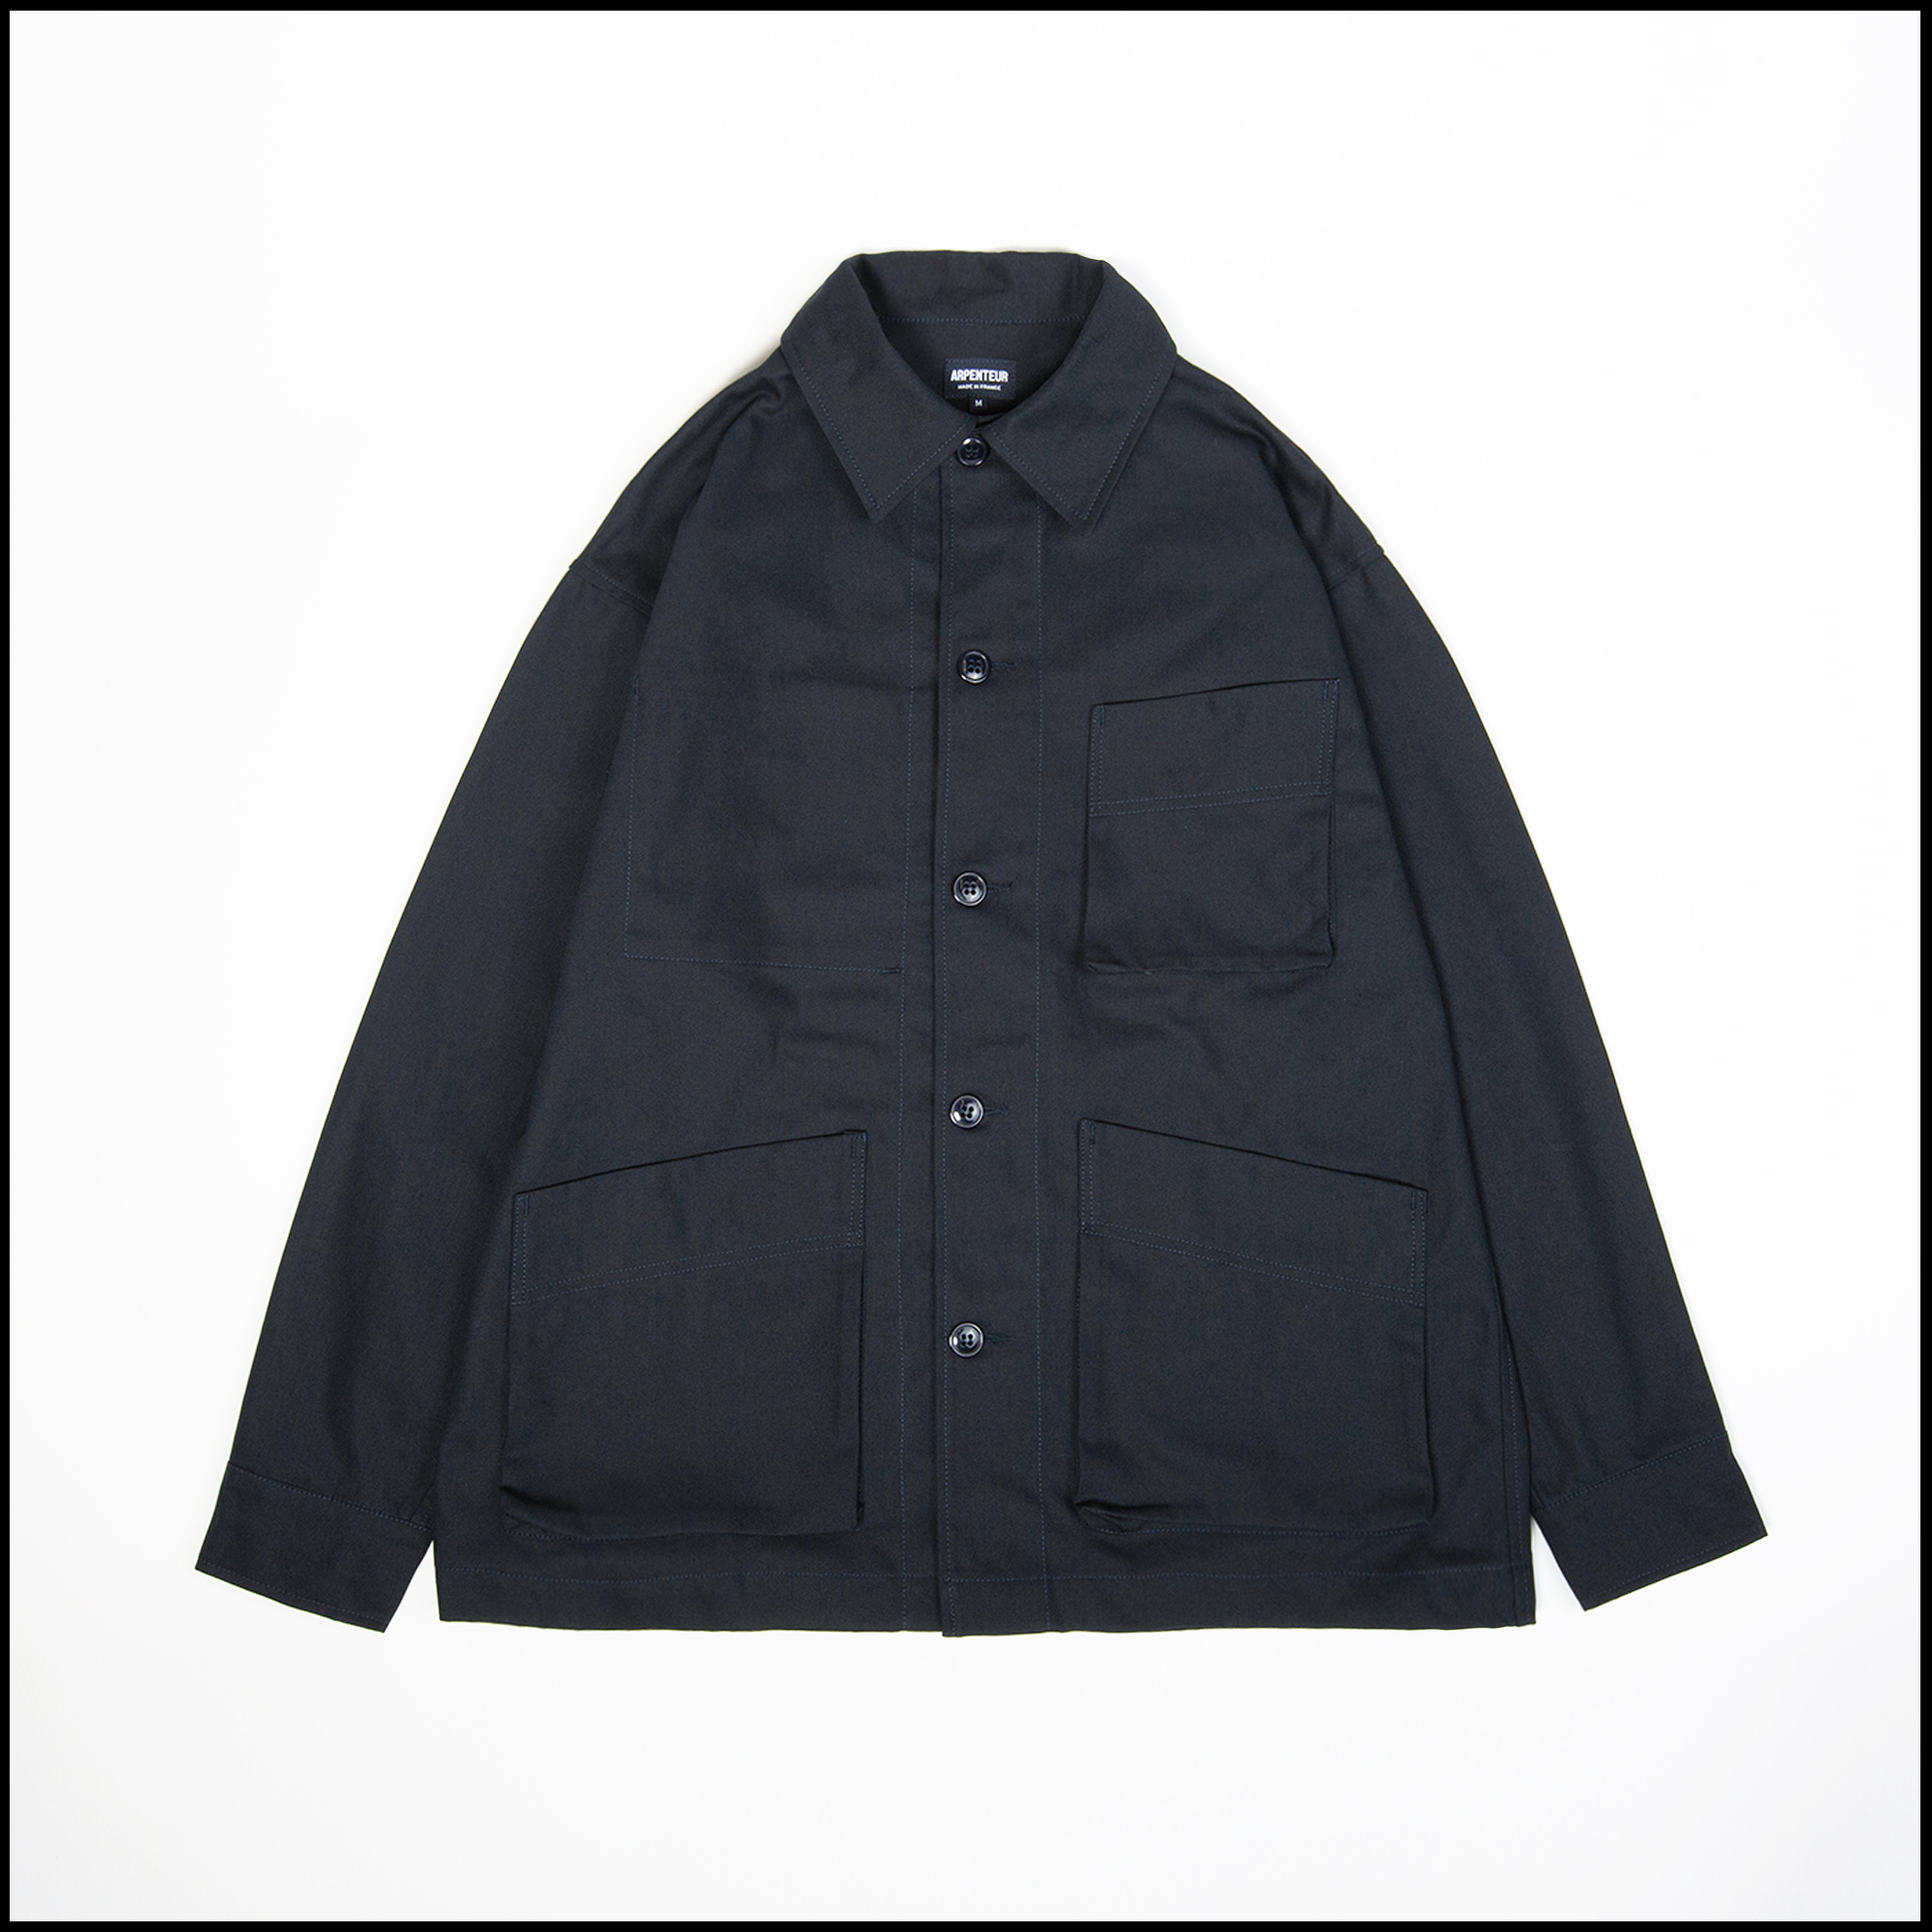 ADN jacket in Midnight blue color by Arpenteur